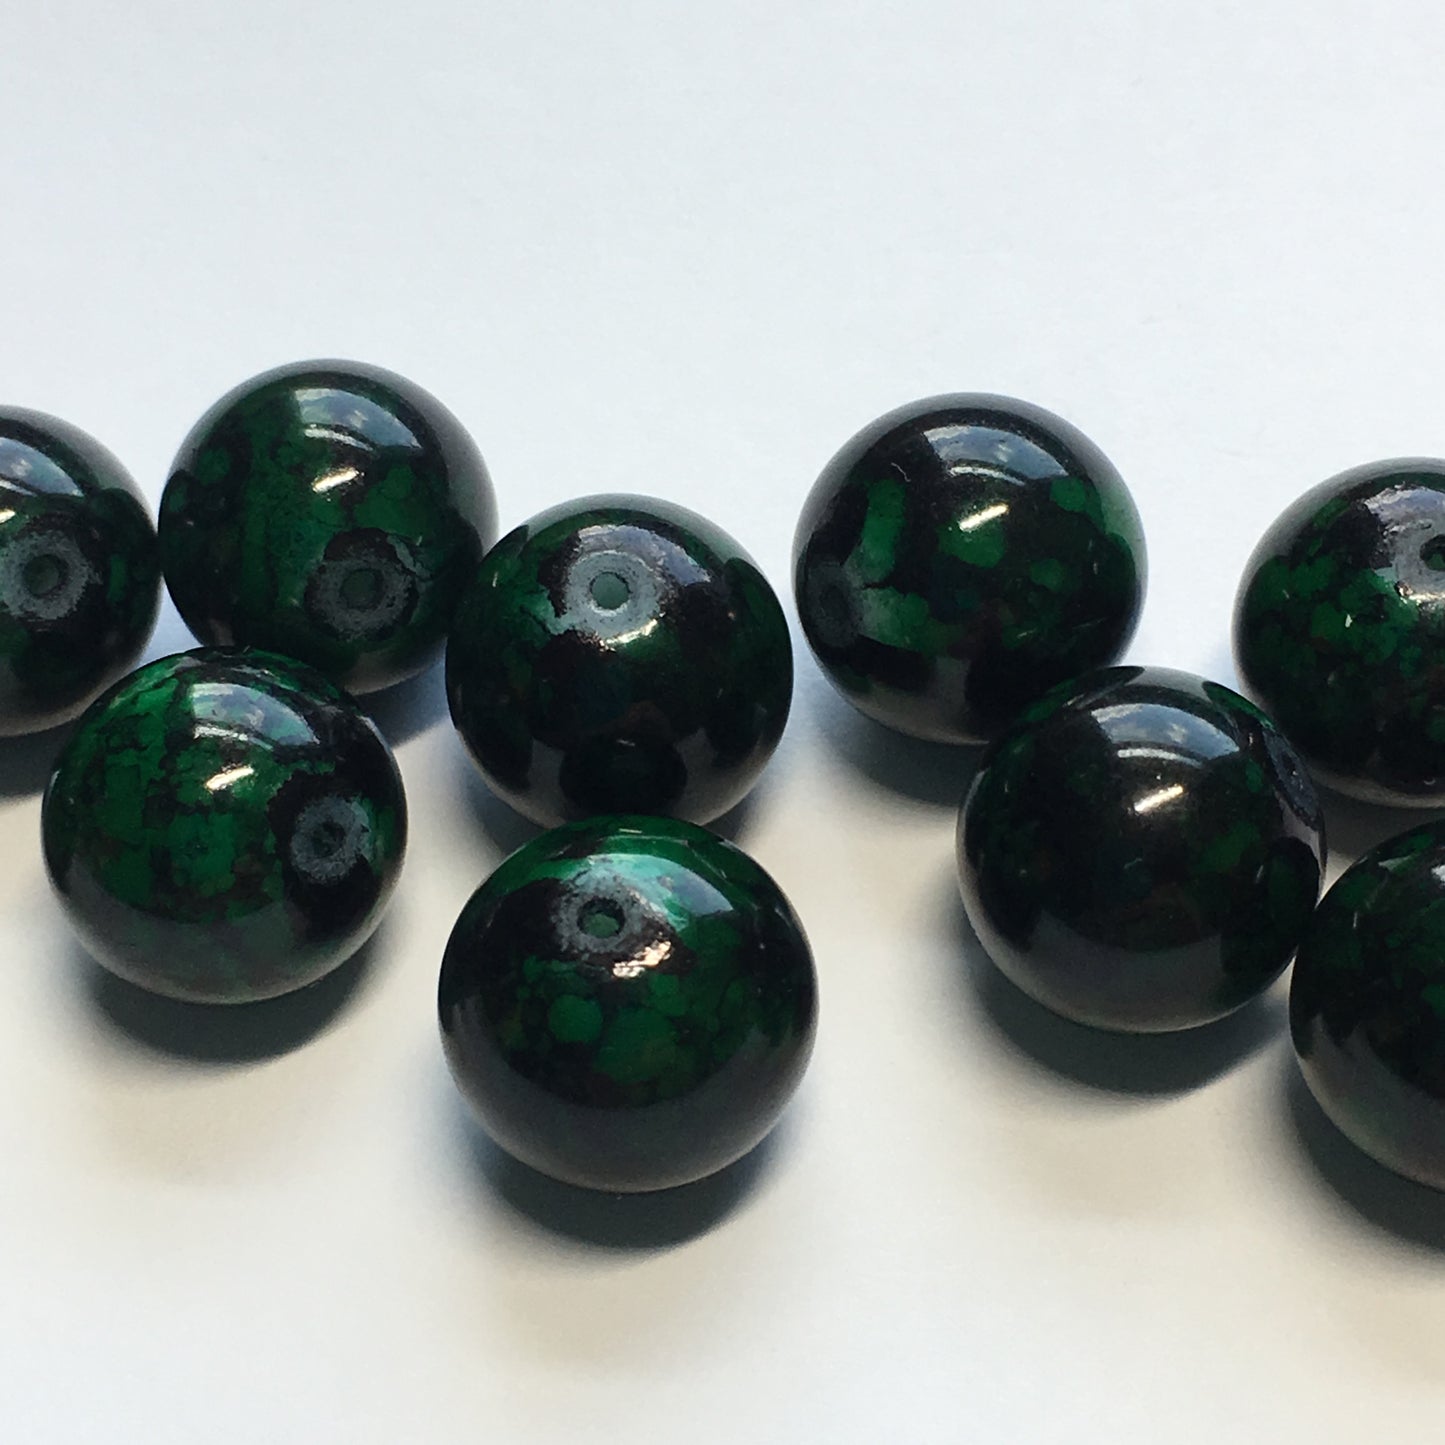 Green Painted Glass Beads 12 mm, 12 Beads